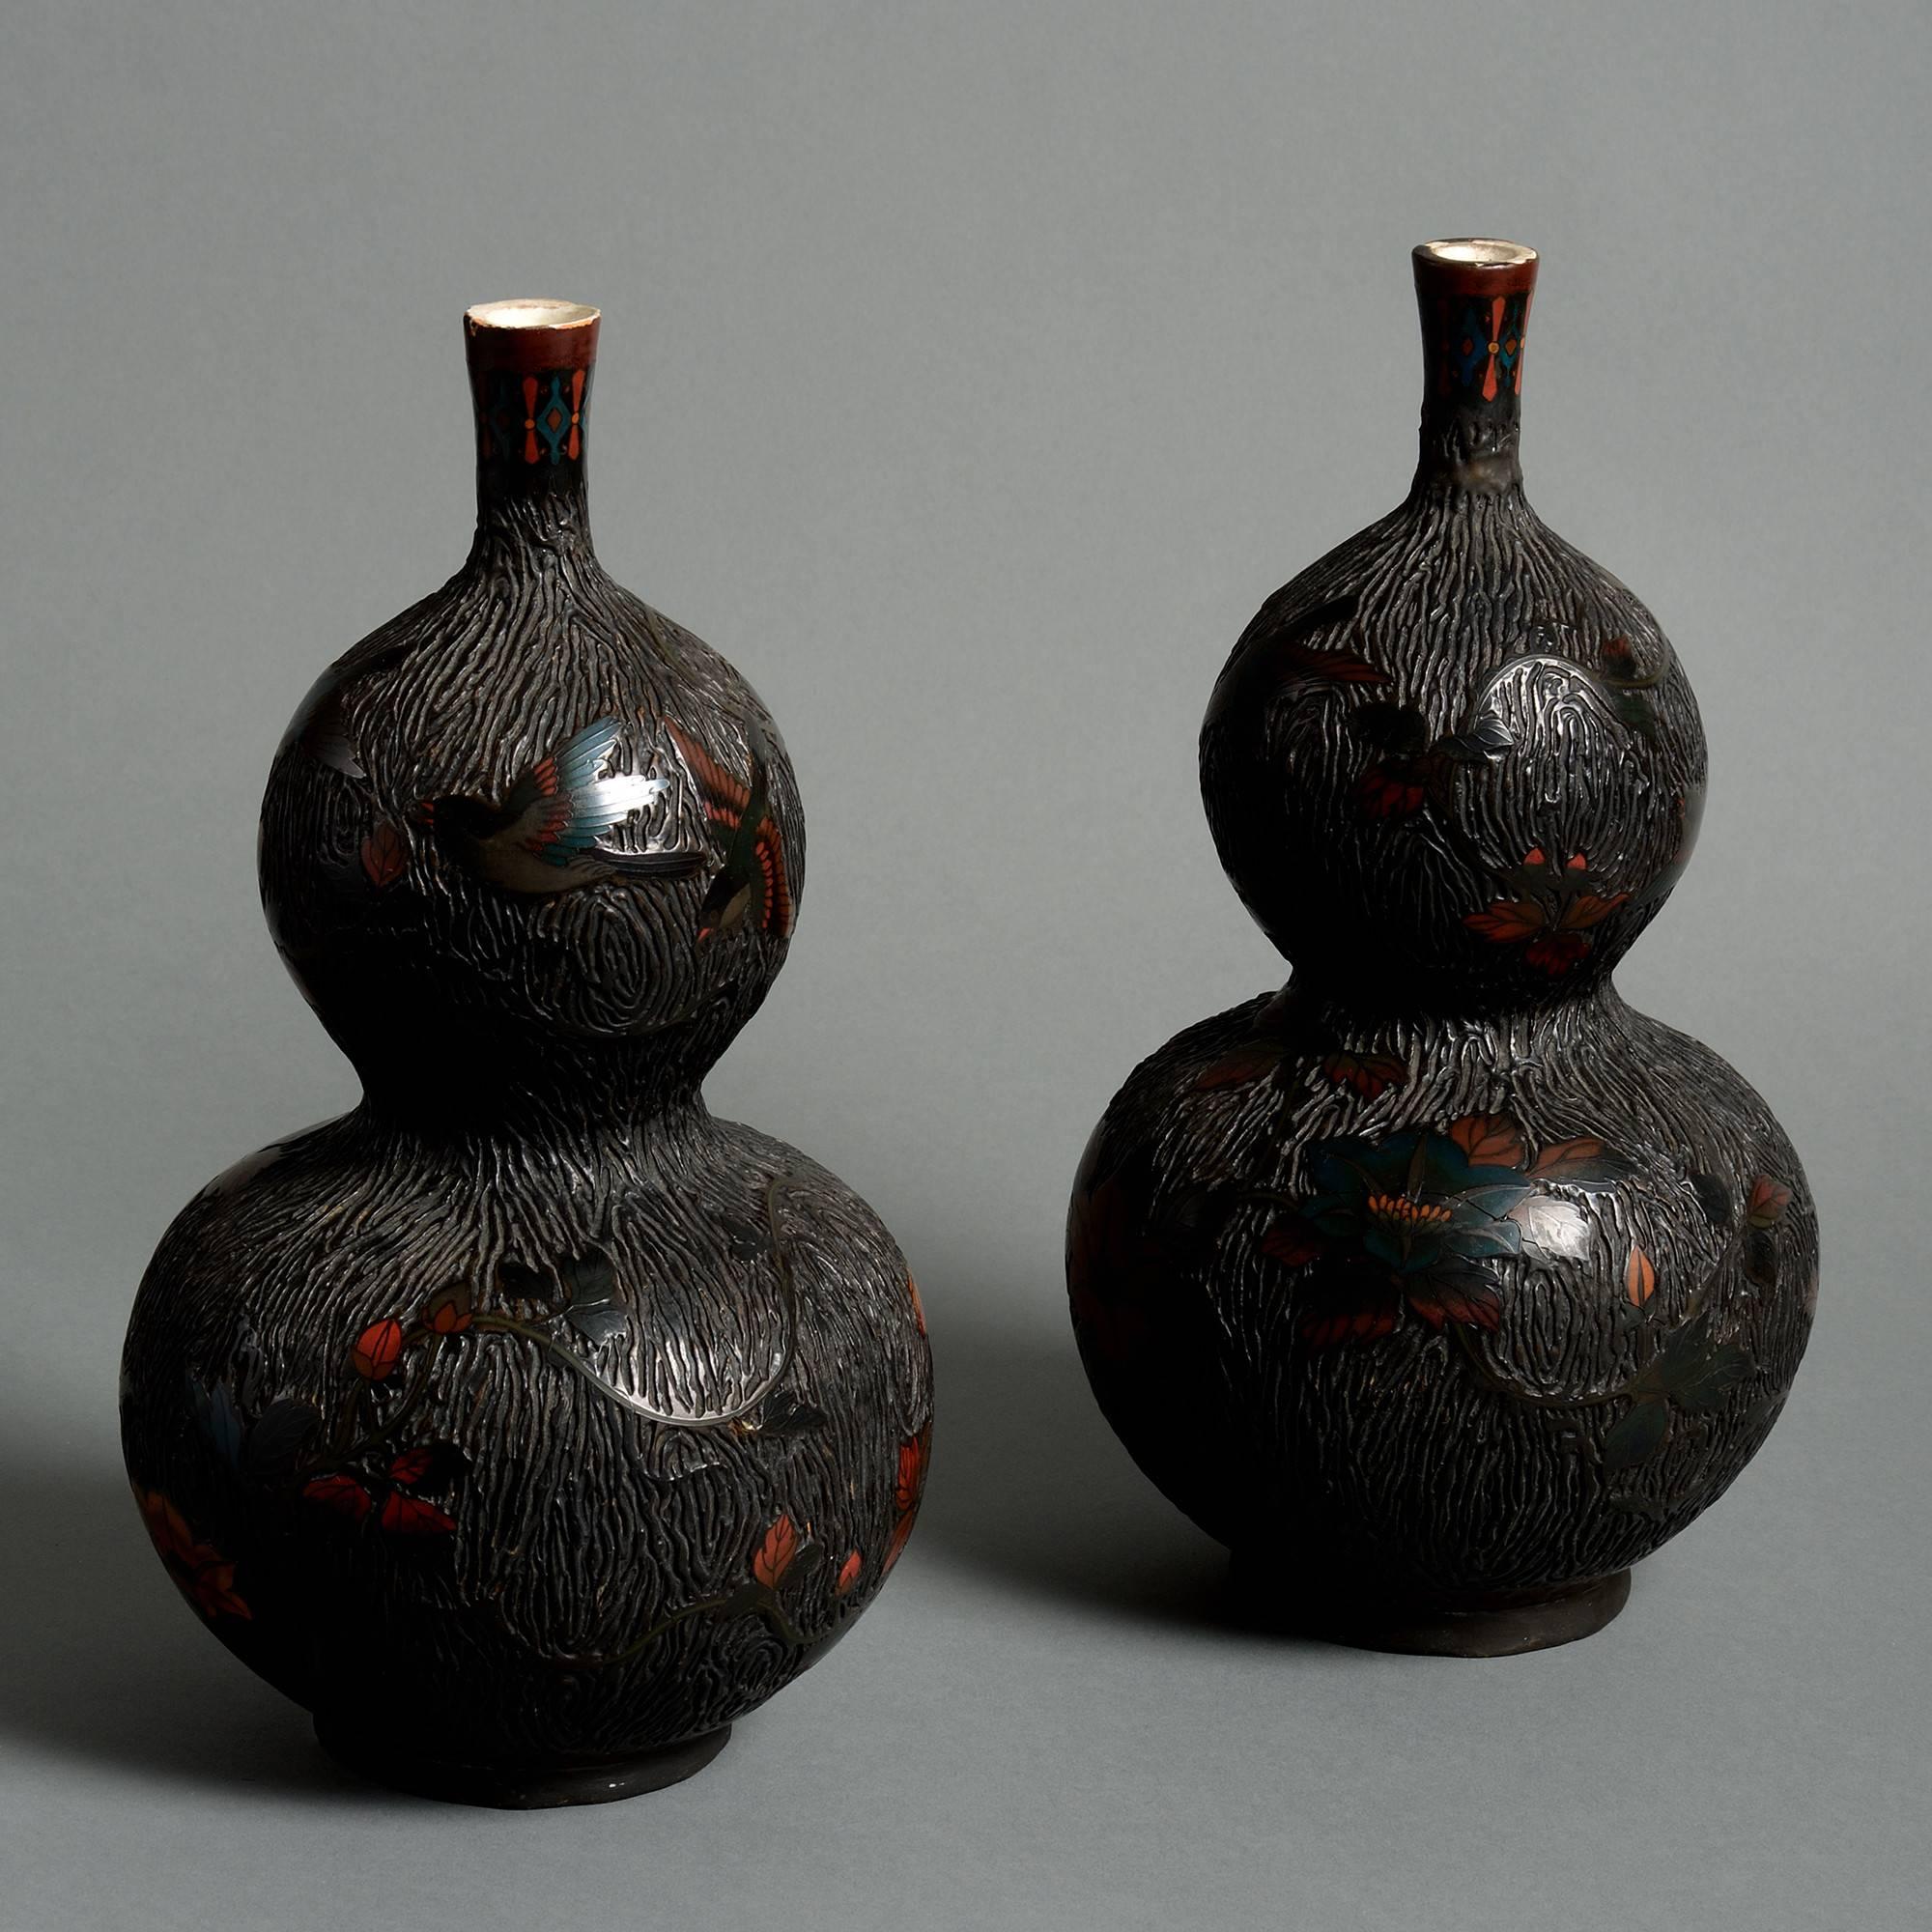 A pair of 19th century pottery vases of double gourd form, decorated throughout with floral and ornithological cloisonné work in red and blue enamels,

Meiji period (1868-1912).